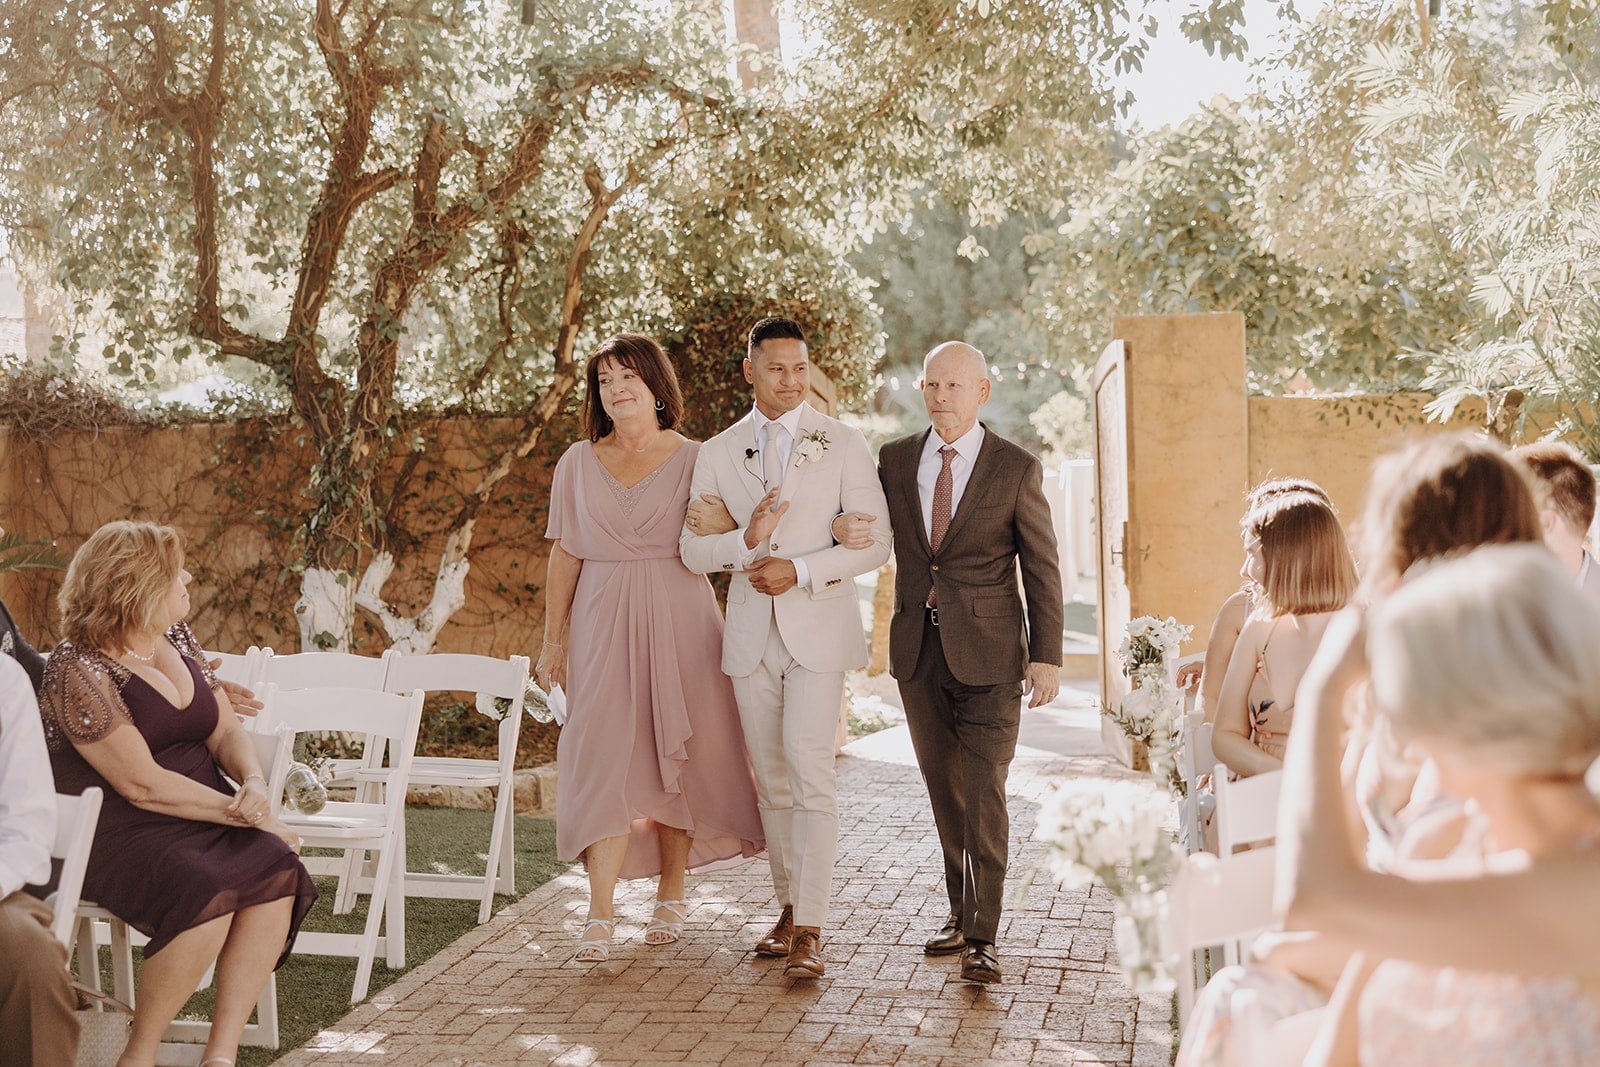 Groom enters outdoor wedding ceremony with his parents